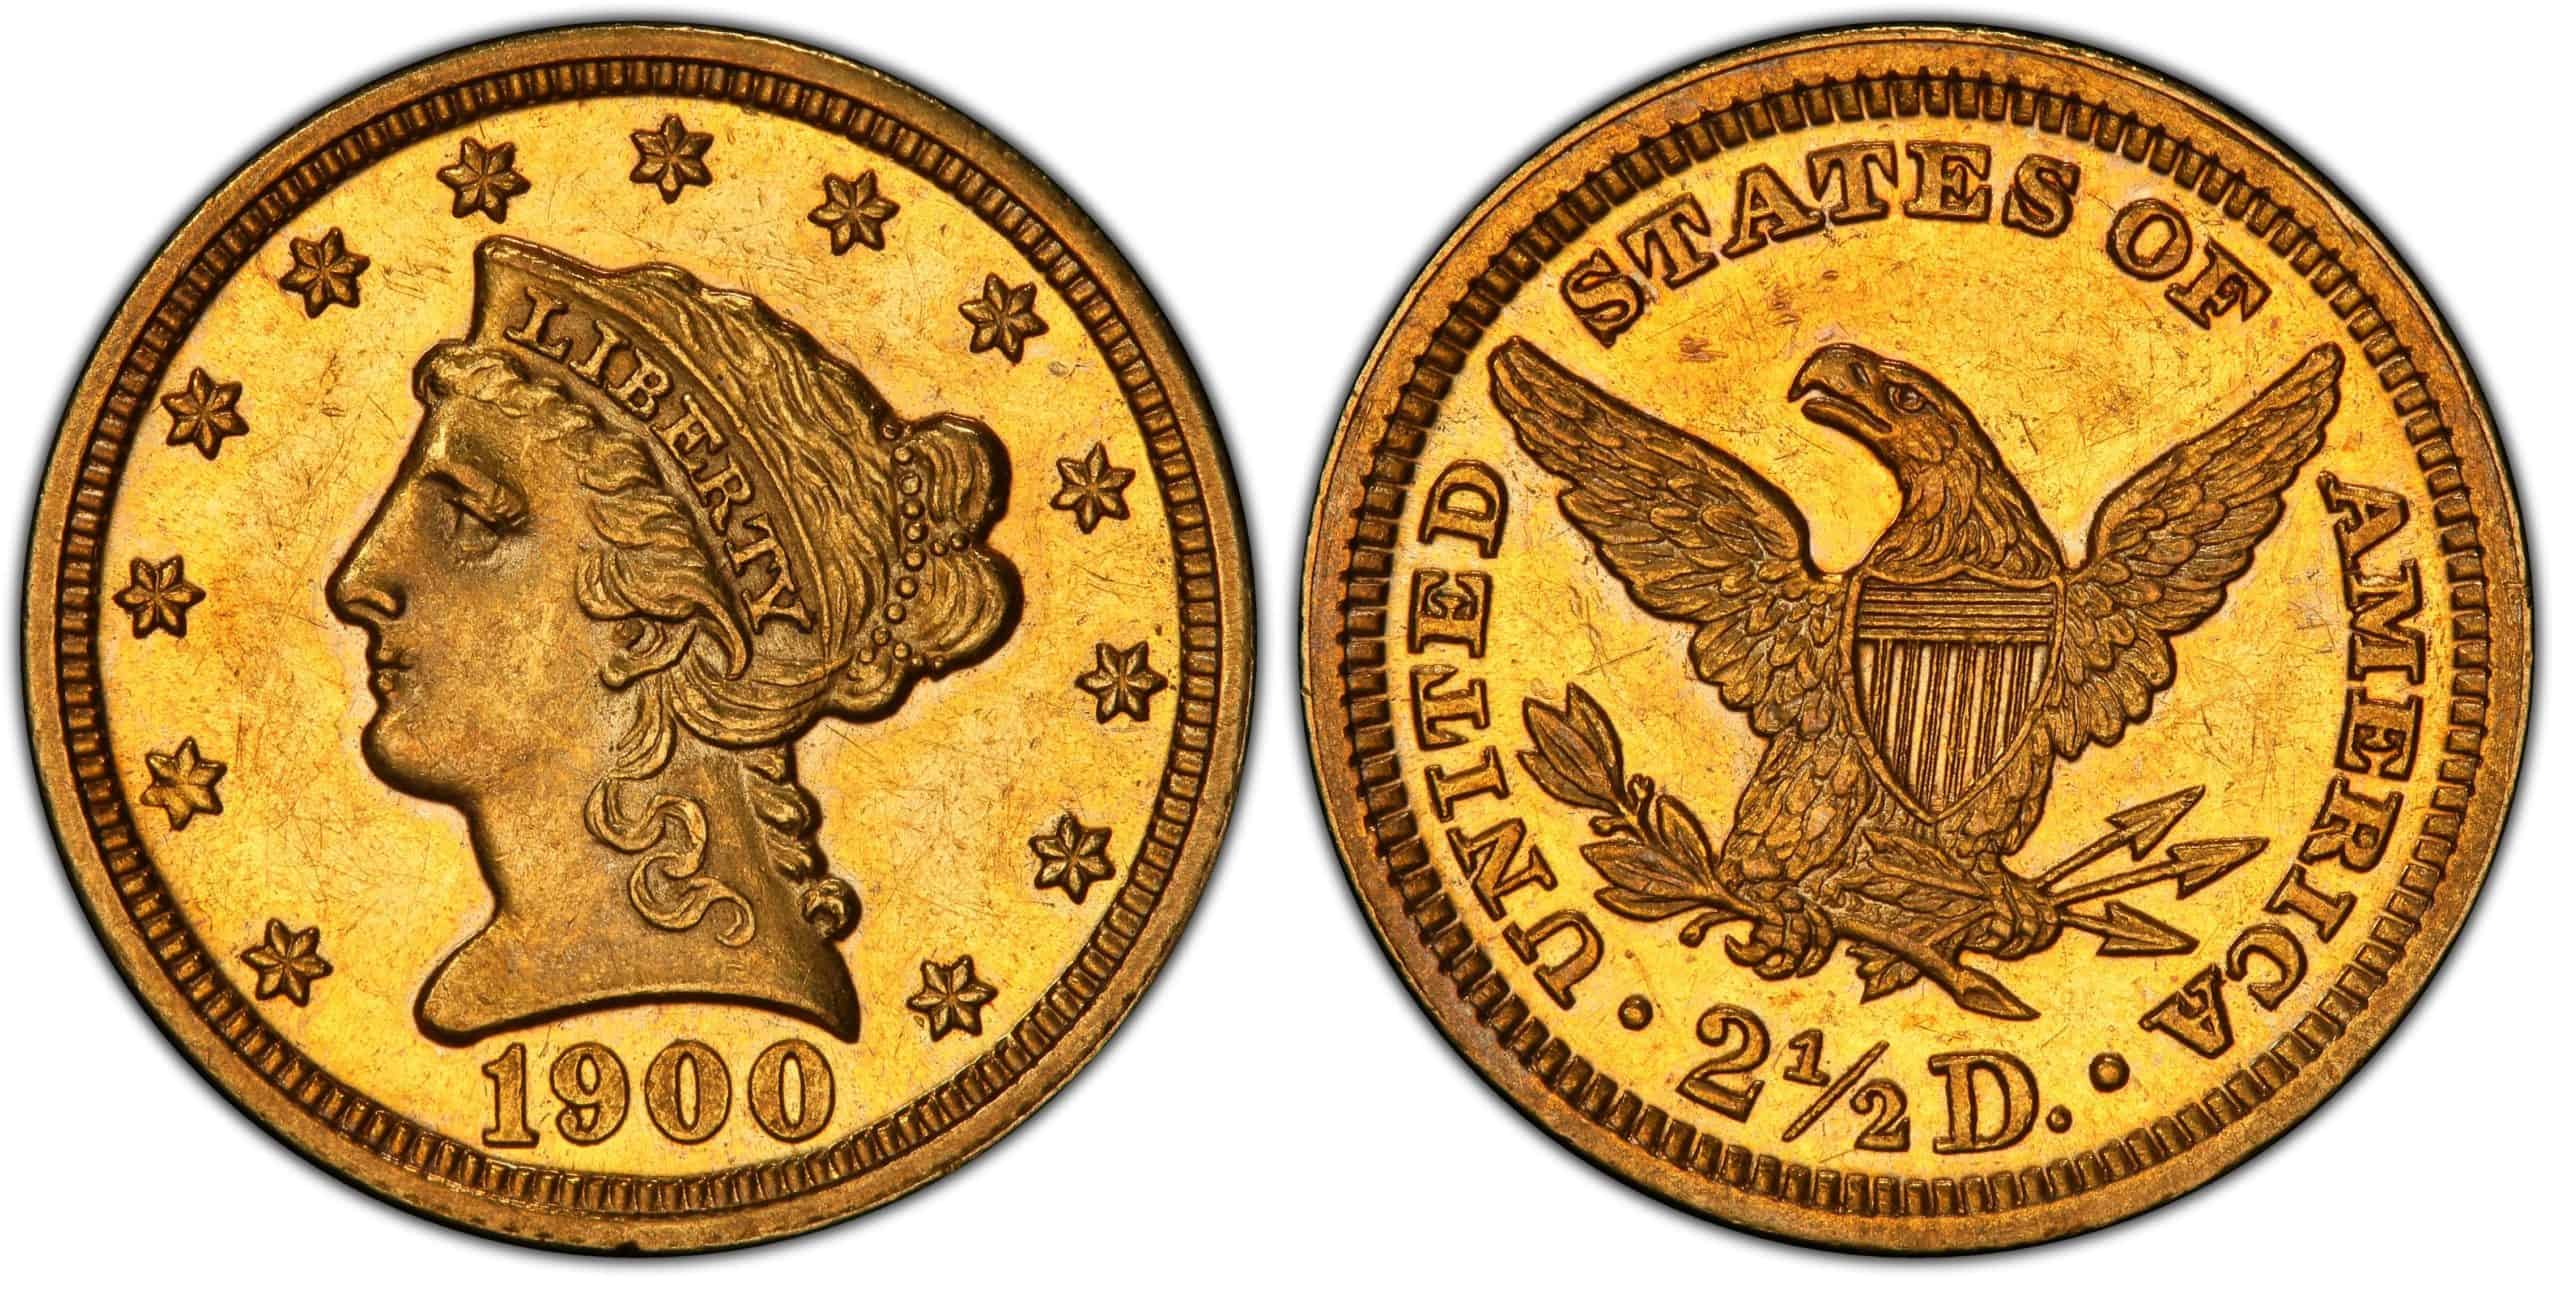 Value of Liberty 2.5 Dollar Gold Coins